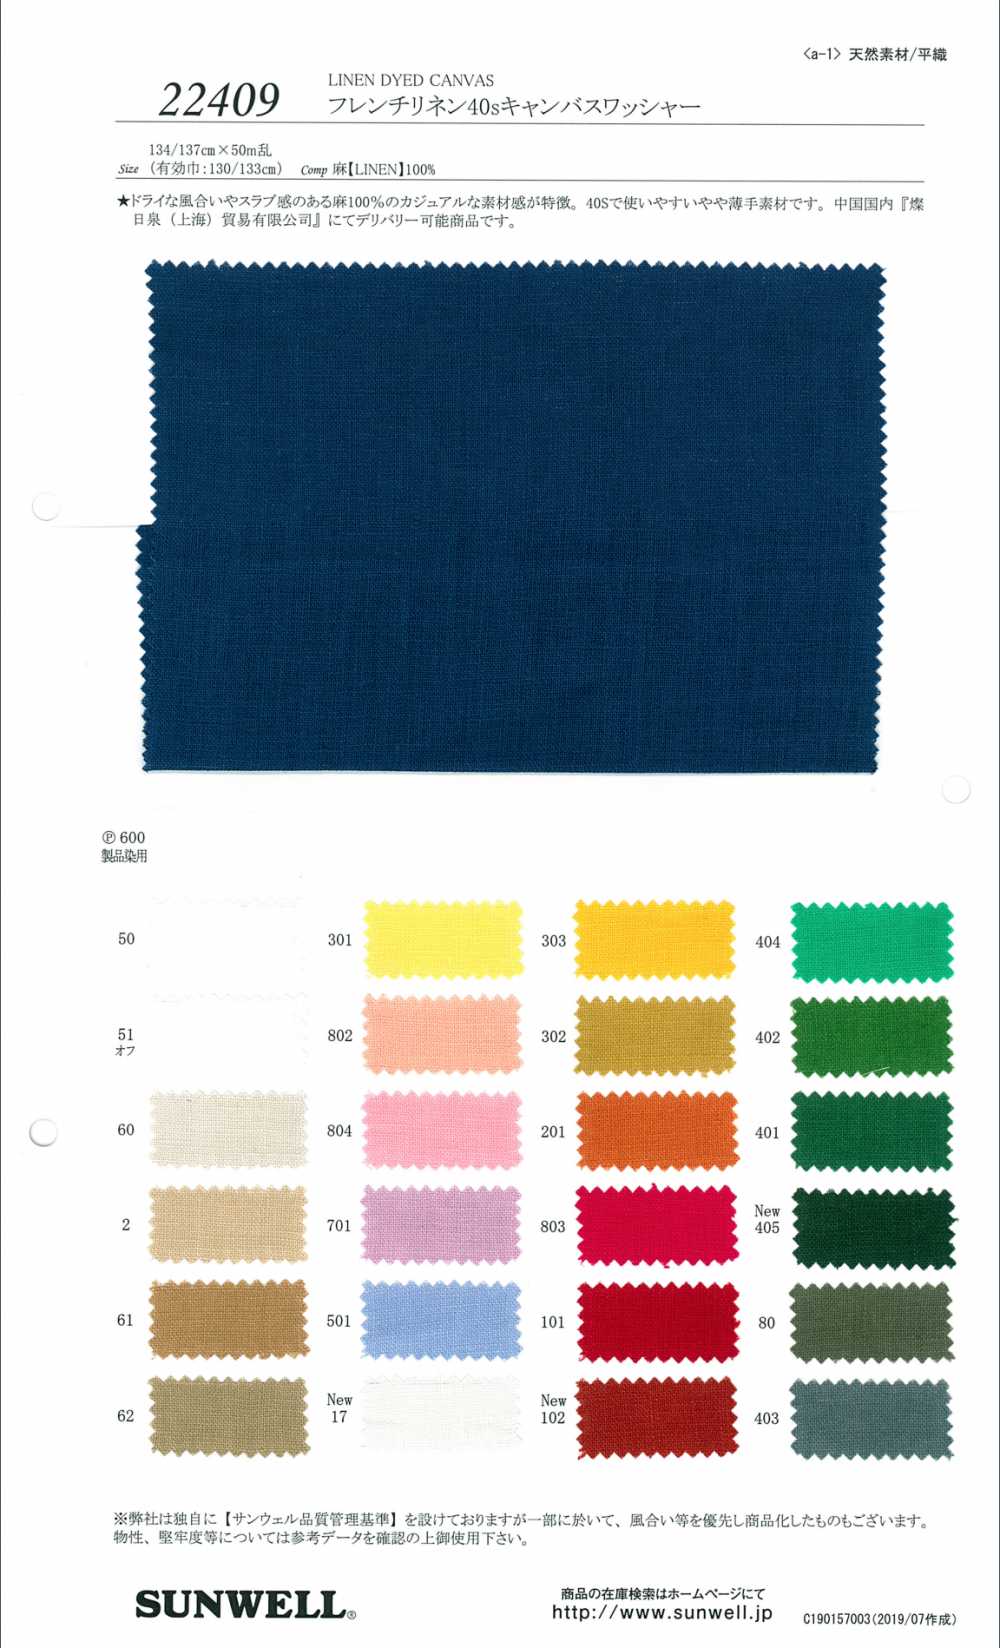 22409 French Linen 40 Single Thread Canvas Washer Processing[Textile / Fabric] SUNWELL